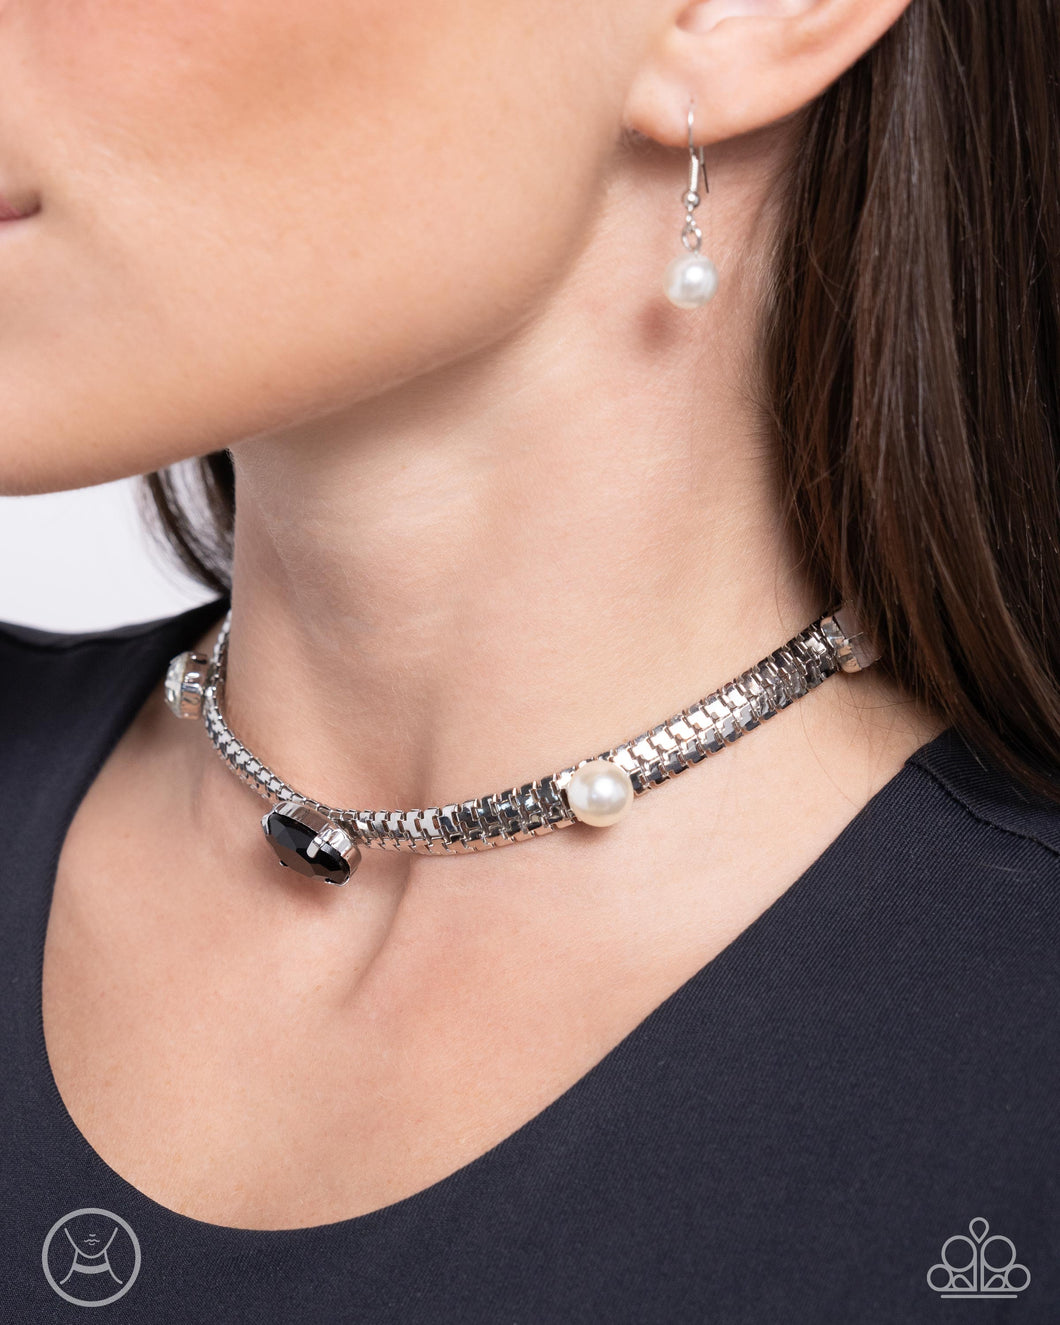 Paparazzi Accessories: Classy Collectable - Black Choker Necklace